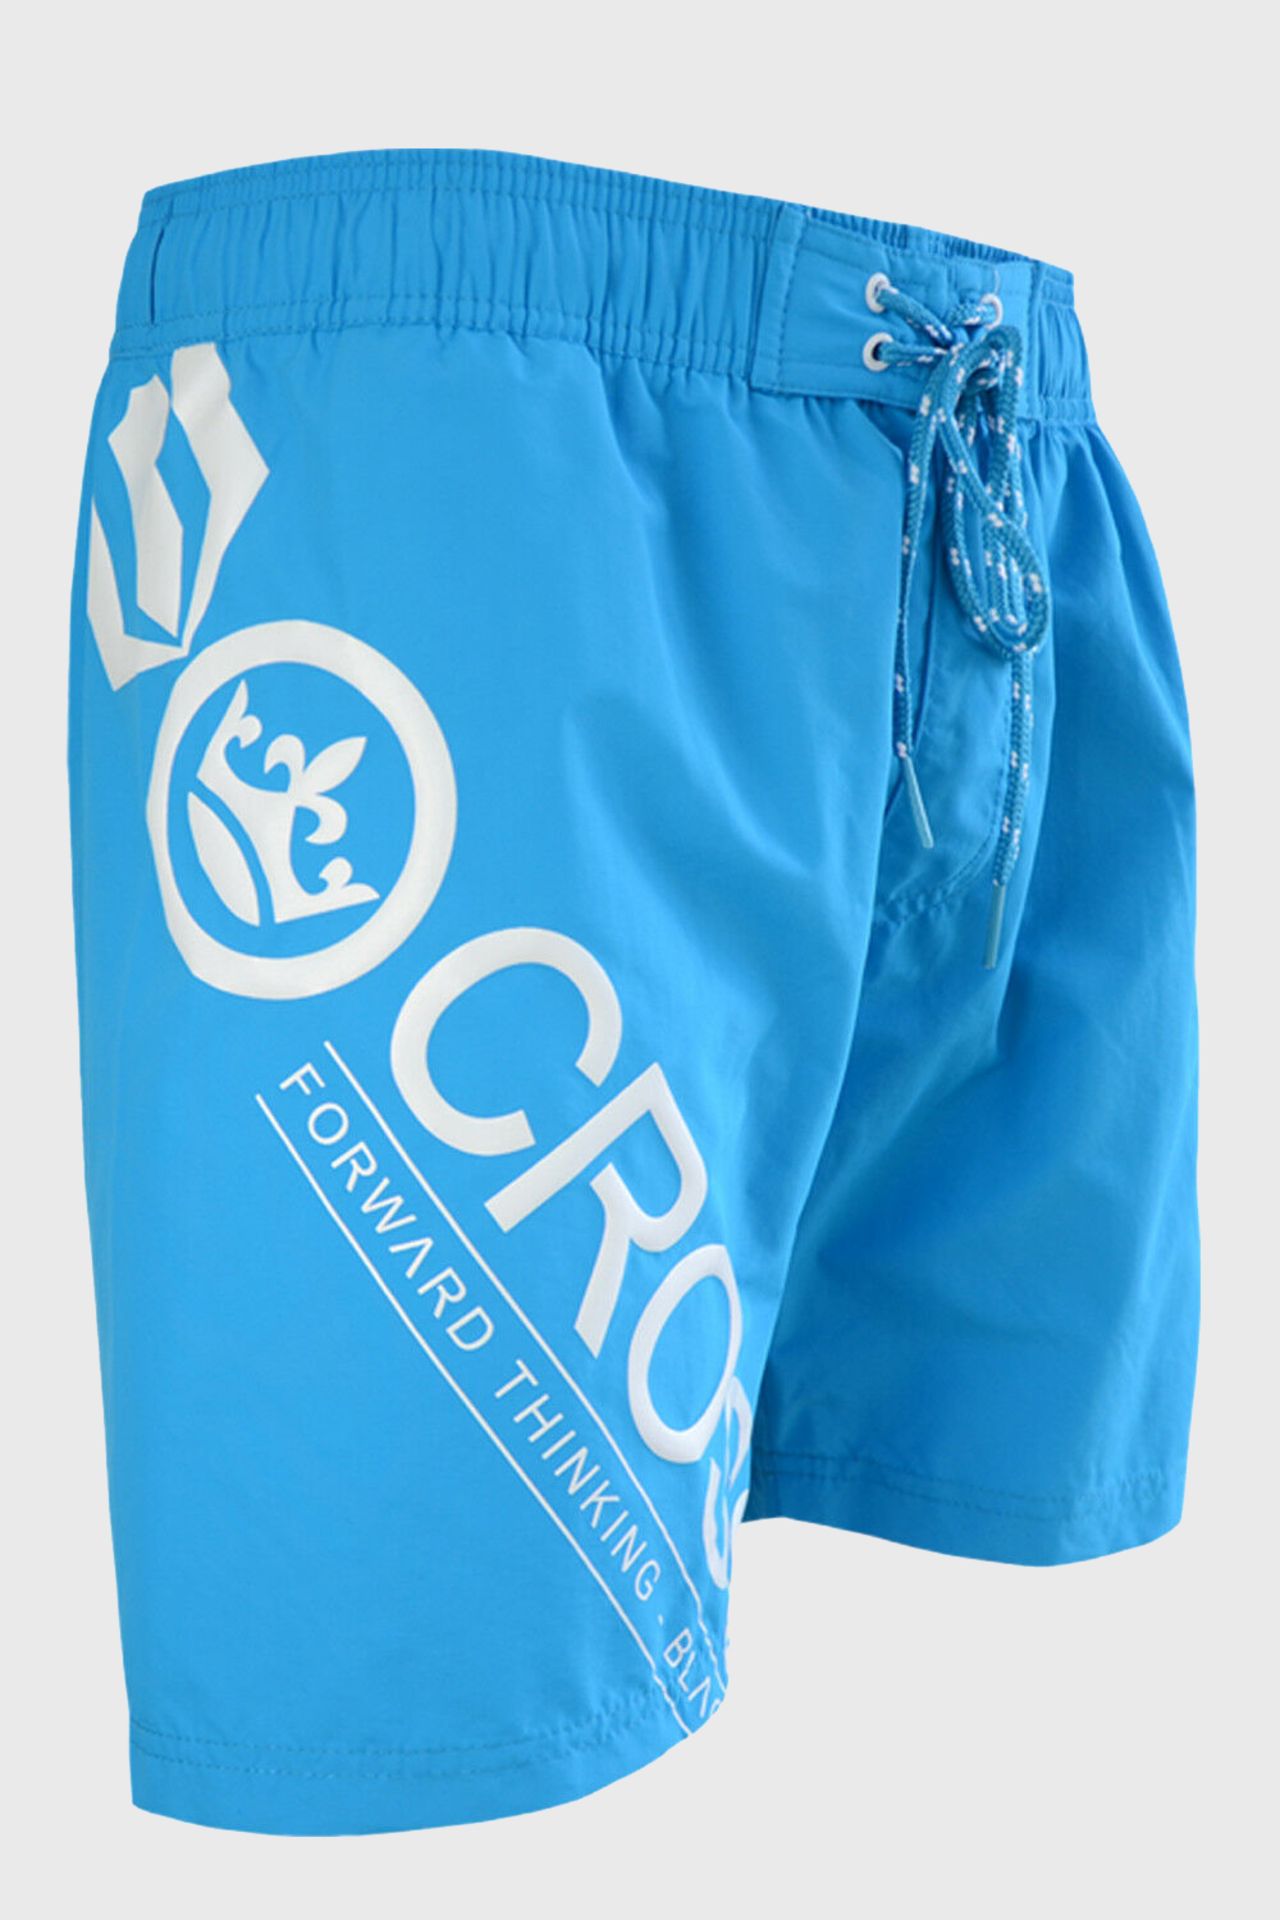 14 X BRAND NEW MEN'S PACIFIC SWIM SHORTS IN SURF THE WEB BLUE SIZE XL RRP EACH £24.99 - TOTAL RRP £